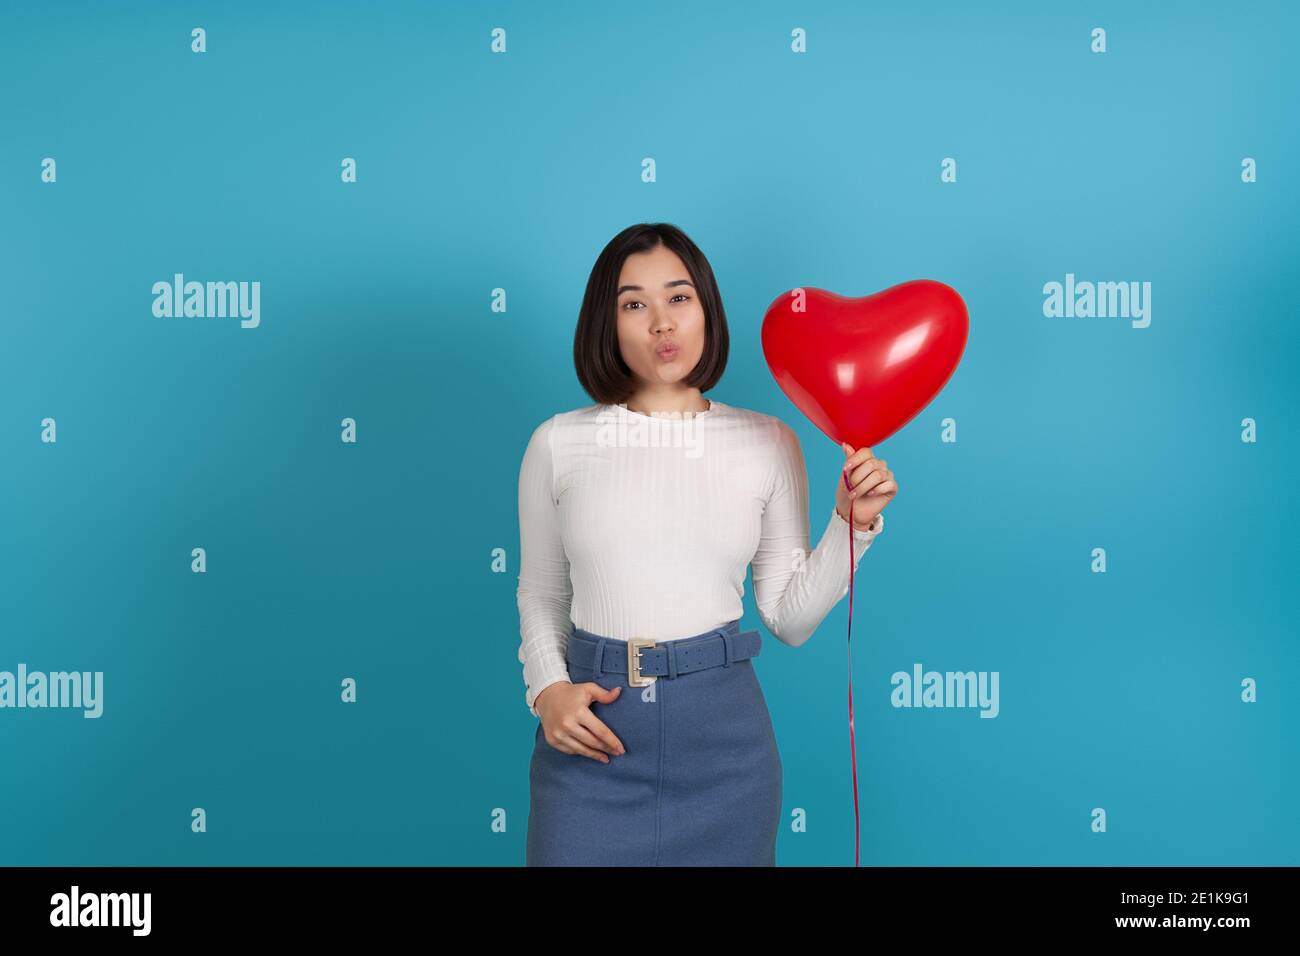 portrait of a young Asian woman blowing a kiss and holding a red heart-shaped balloon isolated on a blue background Stock Photo